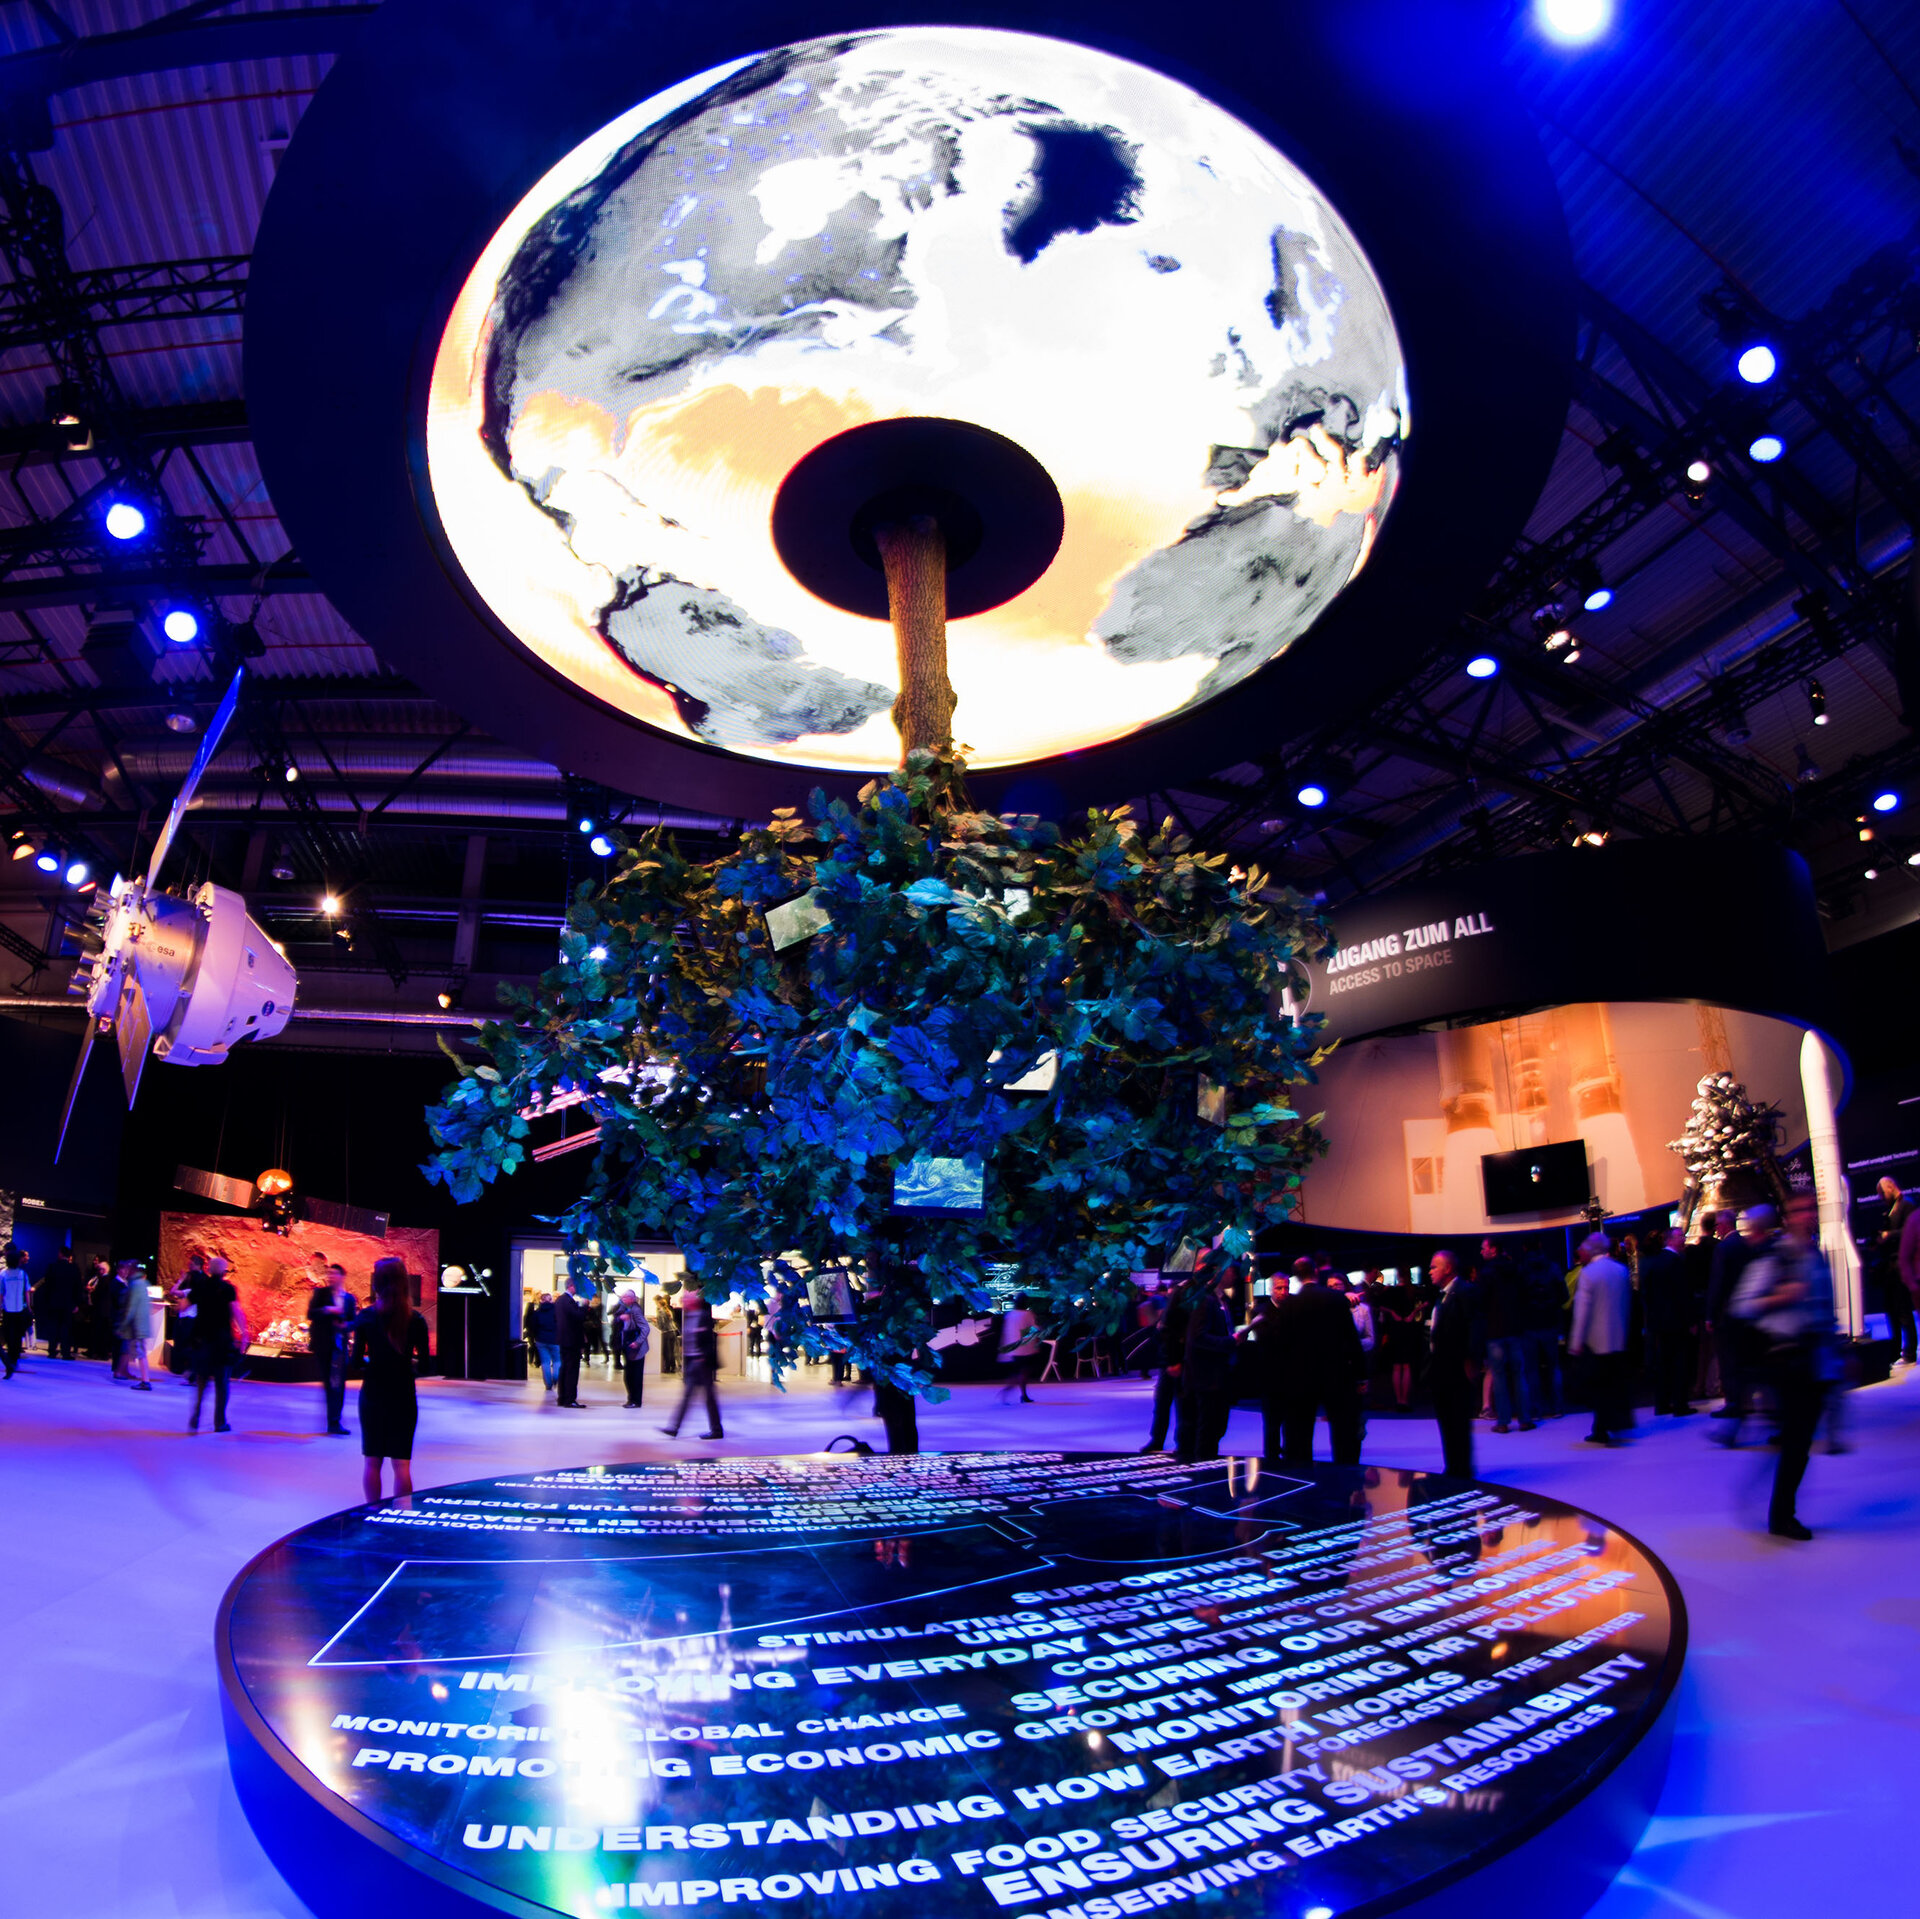 ‘Space for Earth’ pavilion at ILA 2016